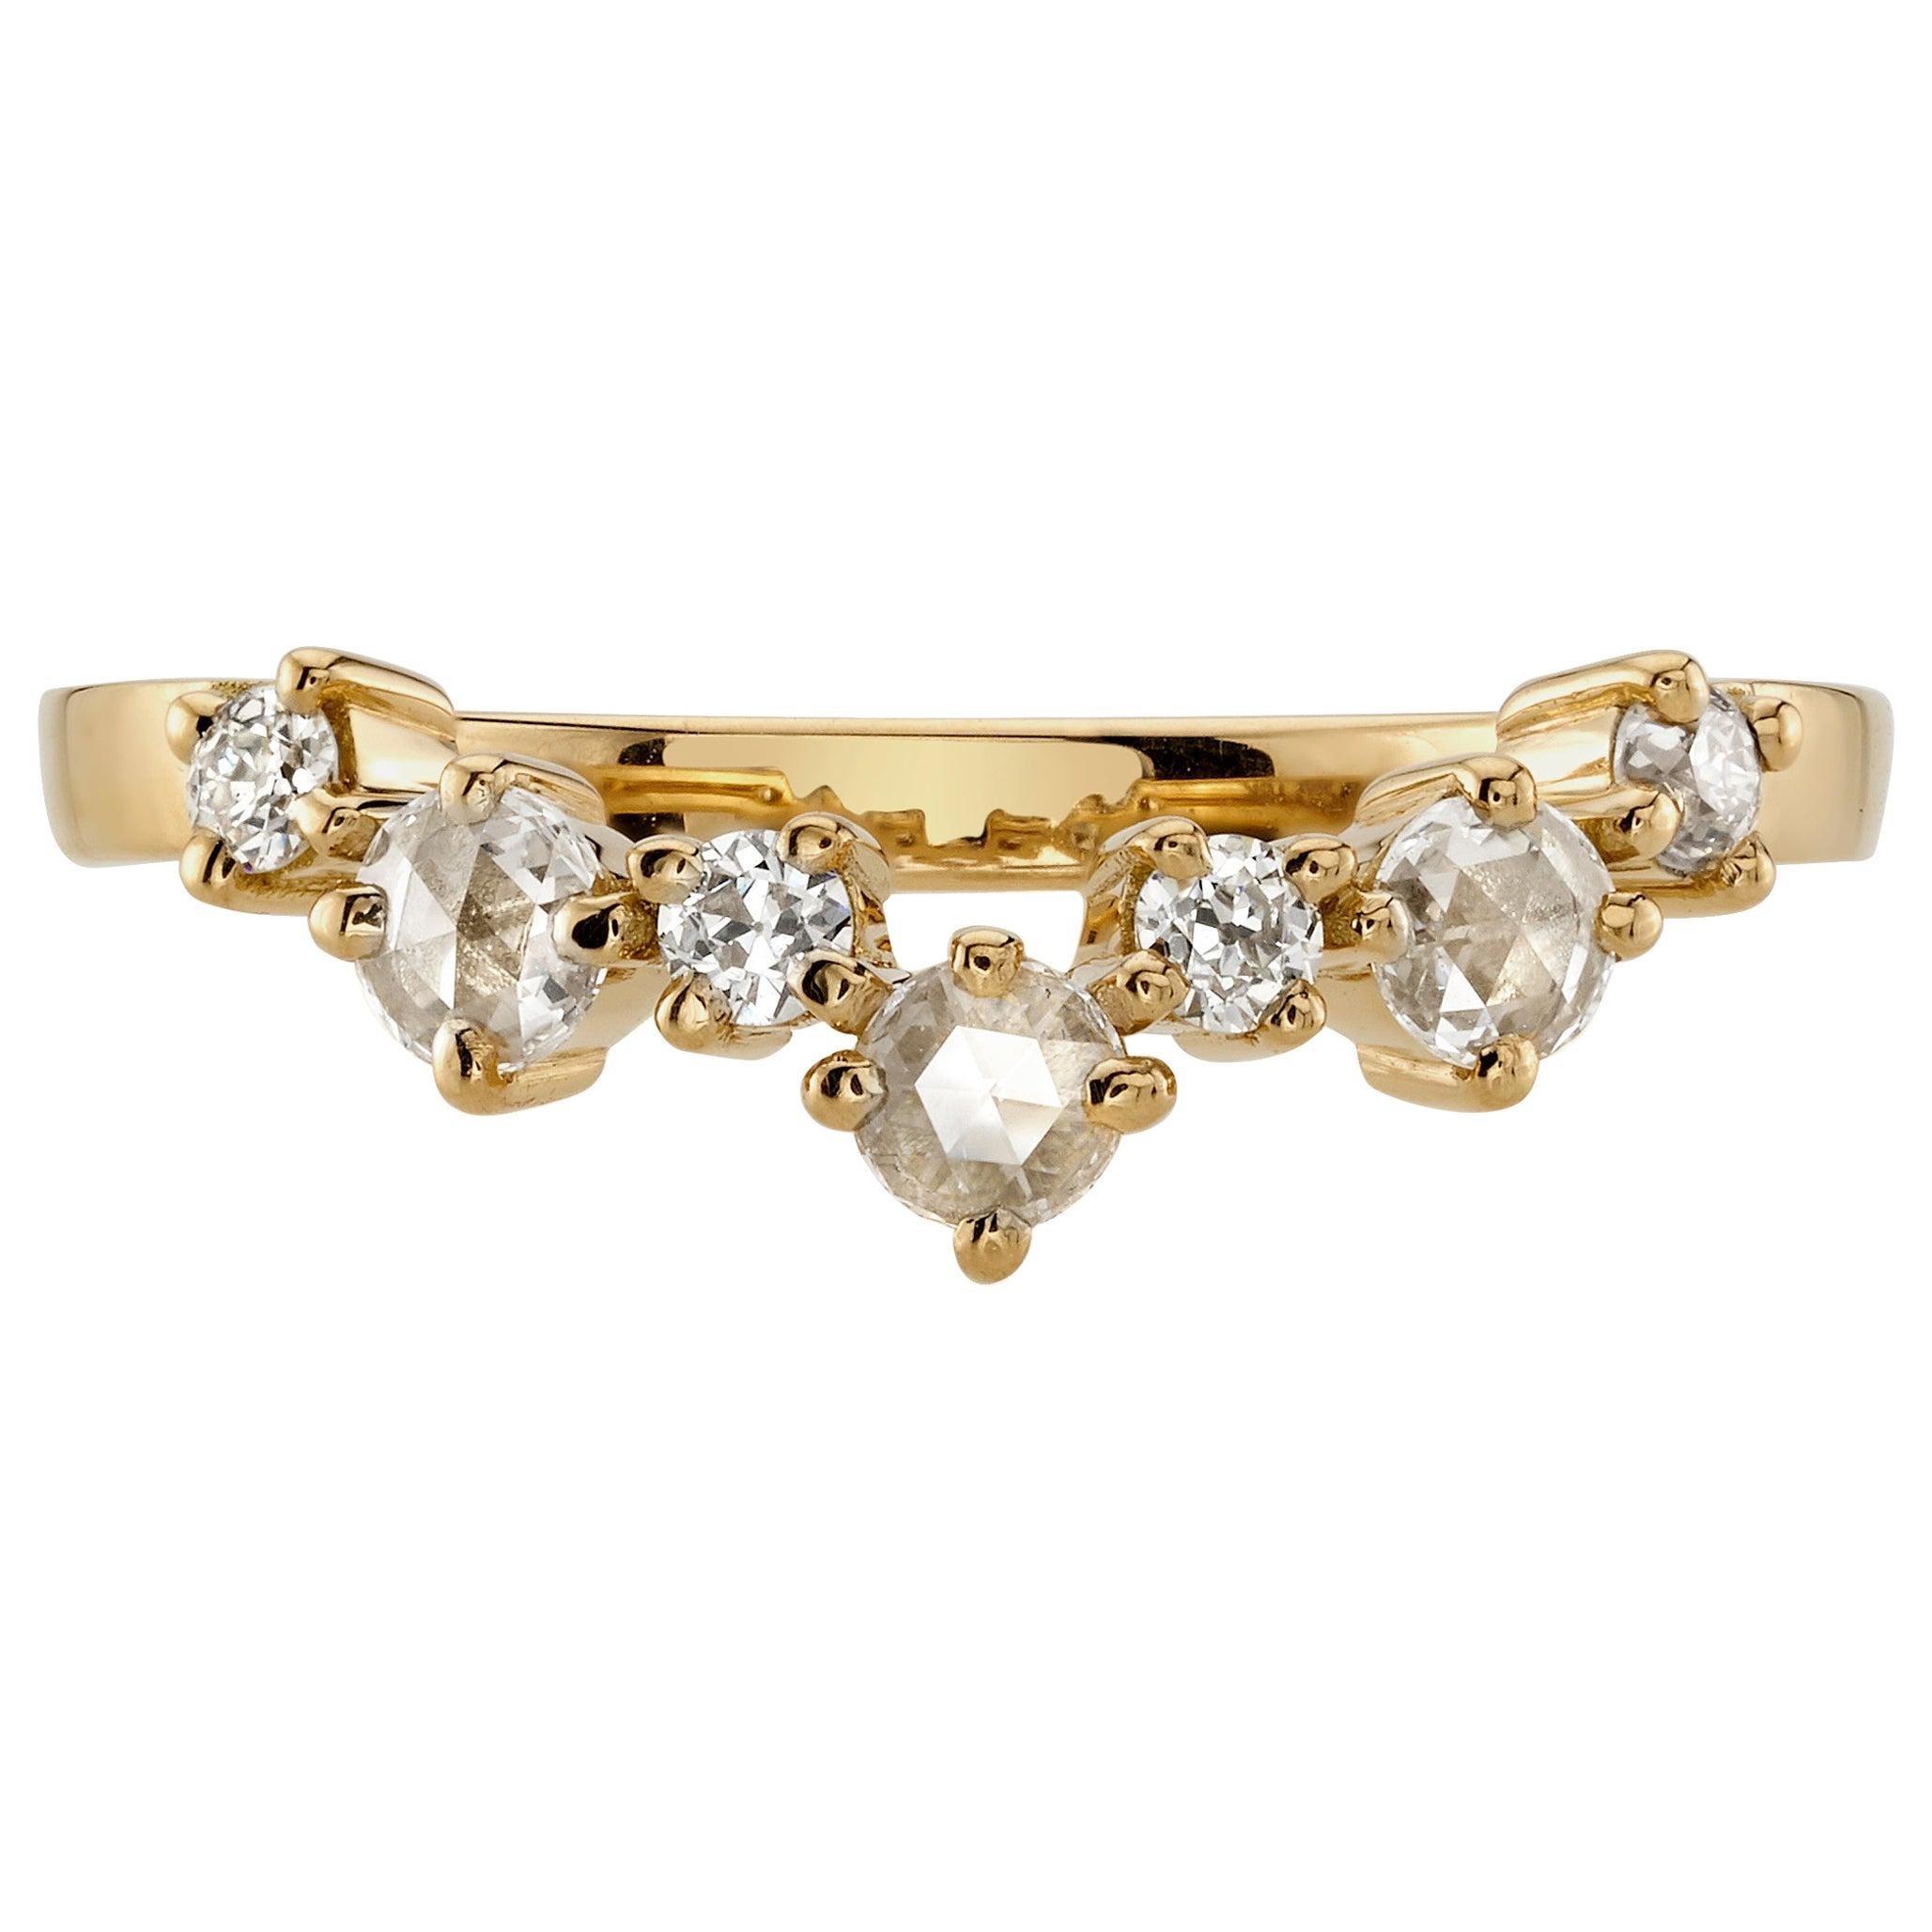 For Sale:  Handcrafted Brooke Mixed Cut Diamond Band by Single Stone